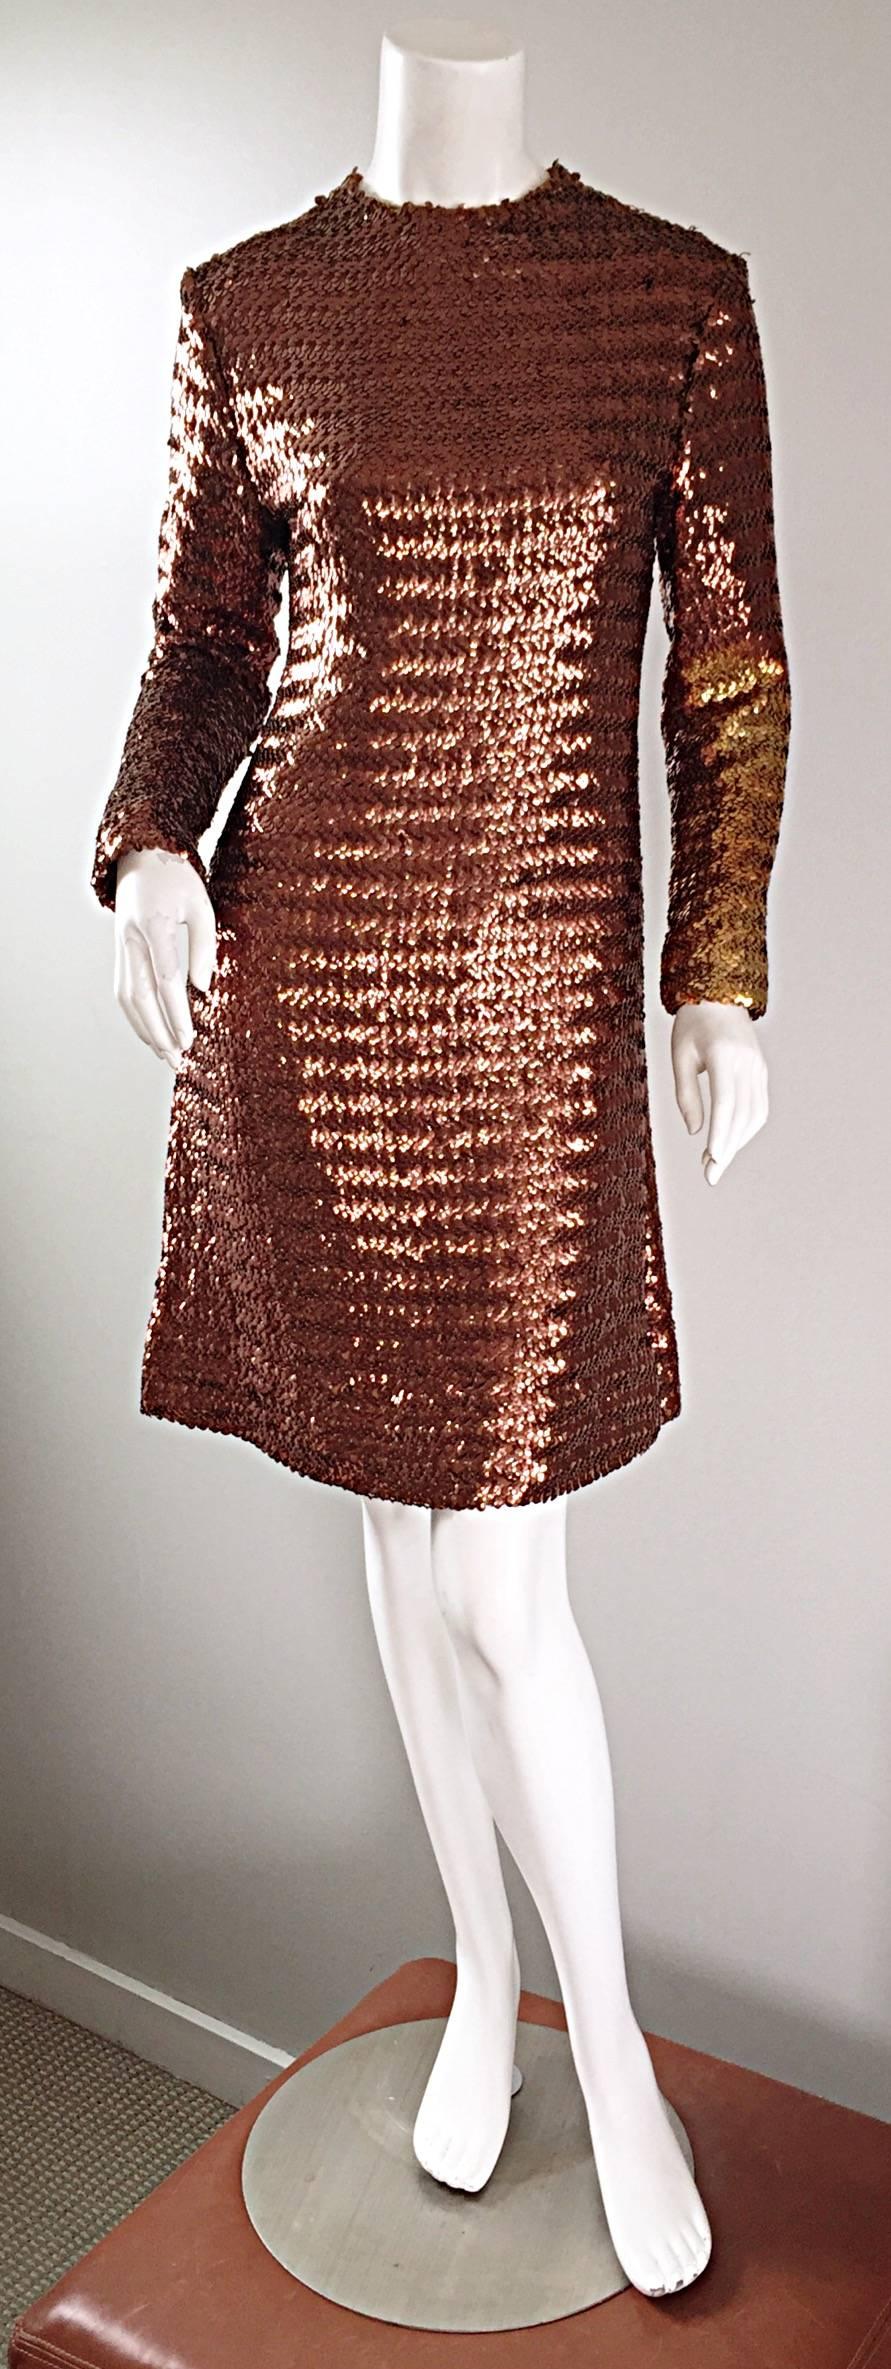 Amazing vintage 60s SUZY PERETTE fully sequined A - Line dress! Features thousands of hand-sewn bronze sequins, with an ombre gold sequined left sleeve. Flattering flared hem. Not only chic, but super comfortable! Wonderful tailored fit. Full metal